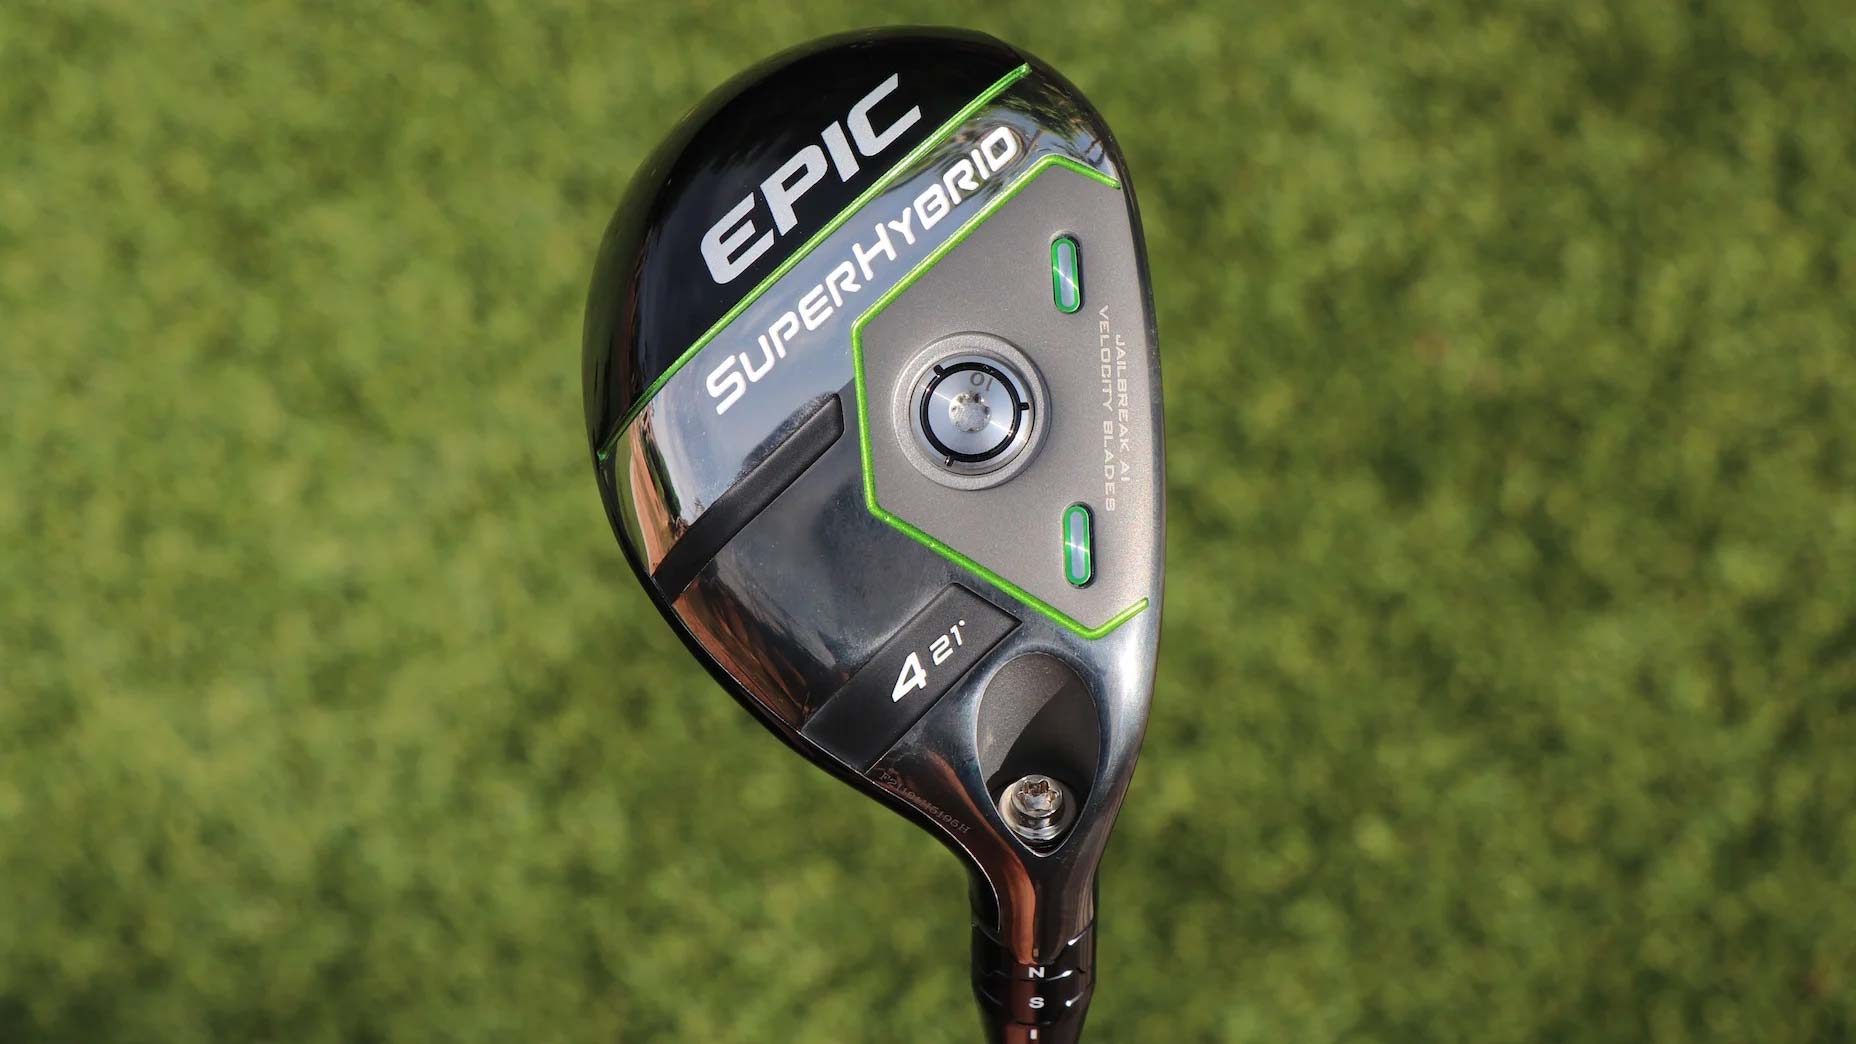 Can Callaway's new Epic Super Hybrid replace a fairway wood?